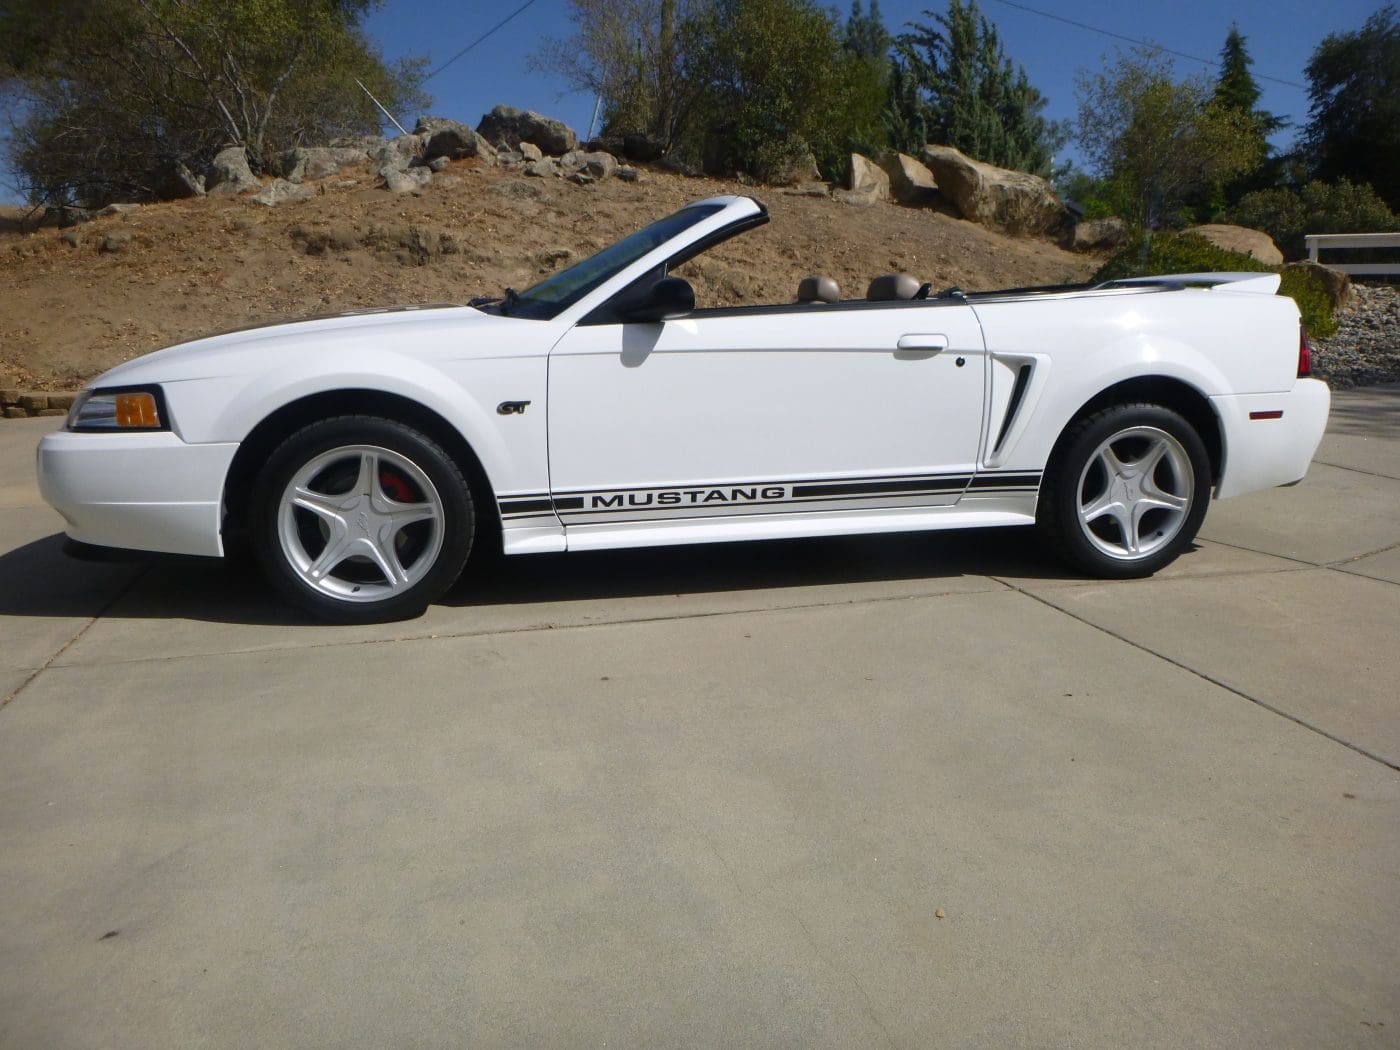 Crystal White 2000 Ford Mustang